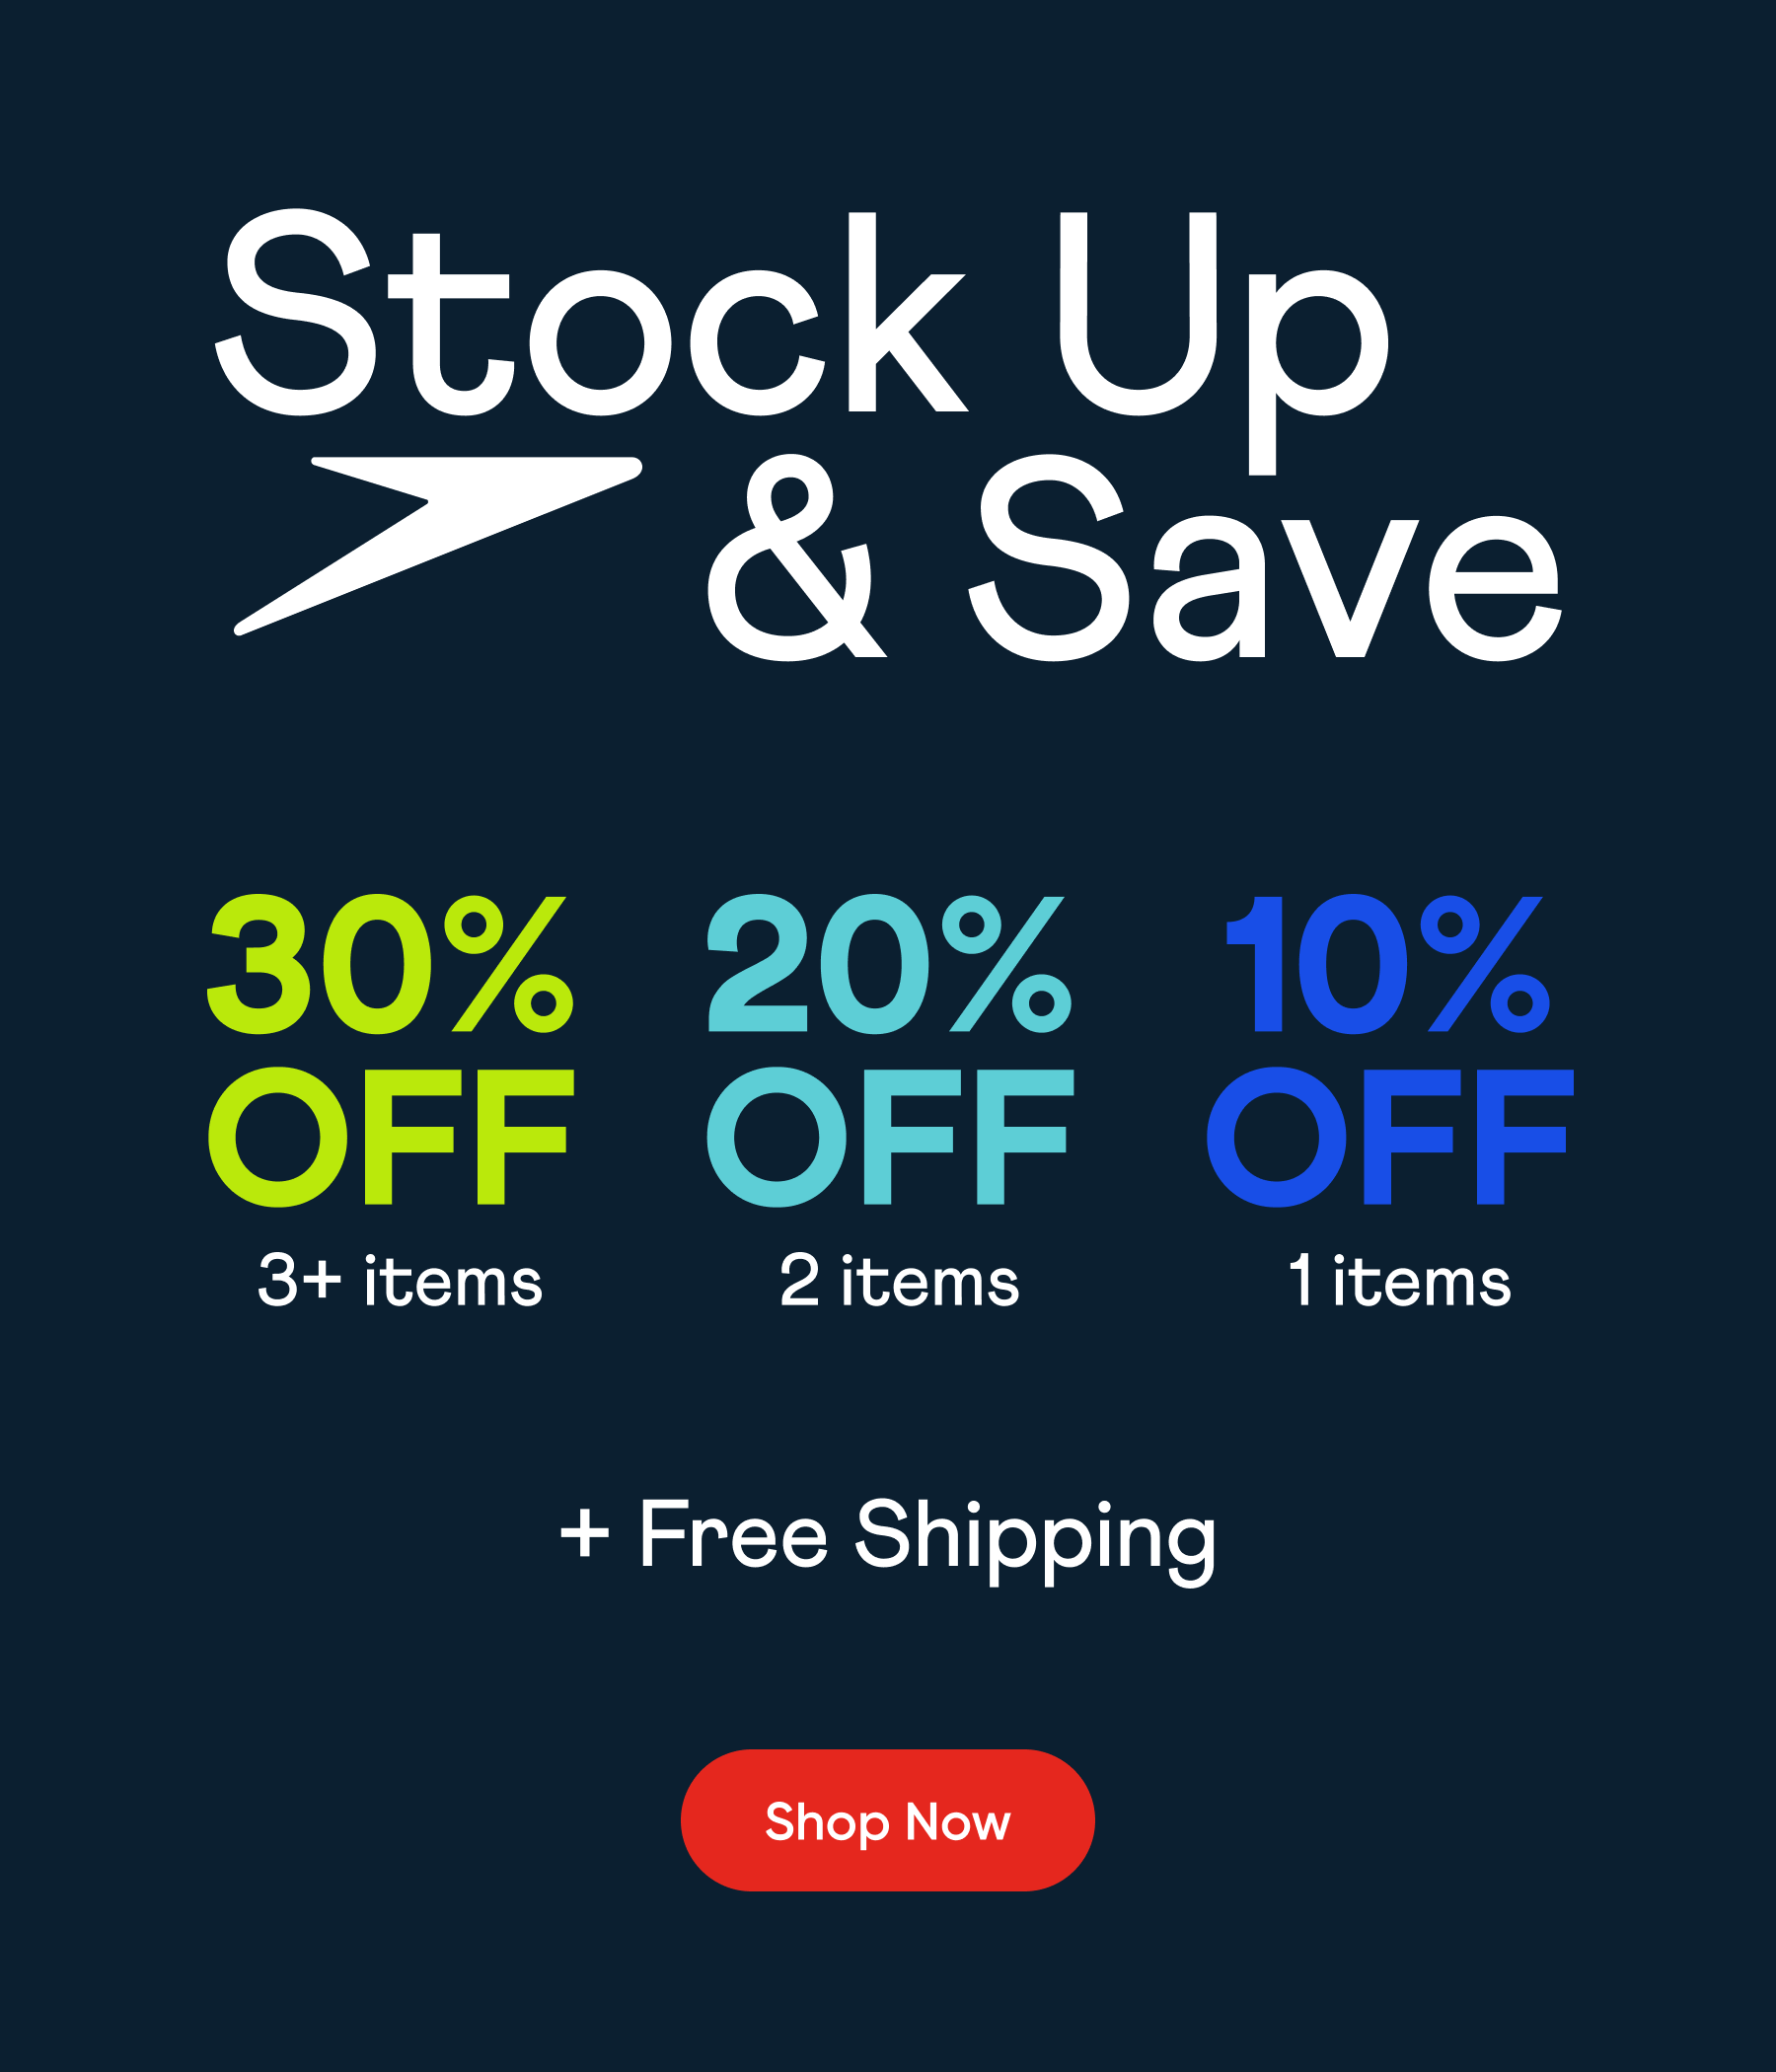 Stock up and save. 30% off 3+ items. 20% off 2 items. 10% off 1 item.